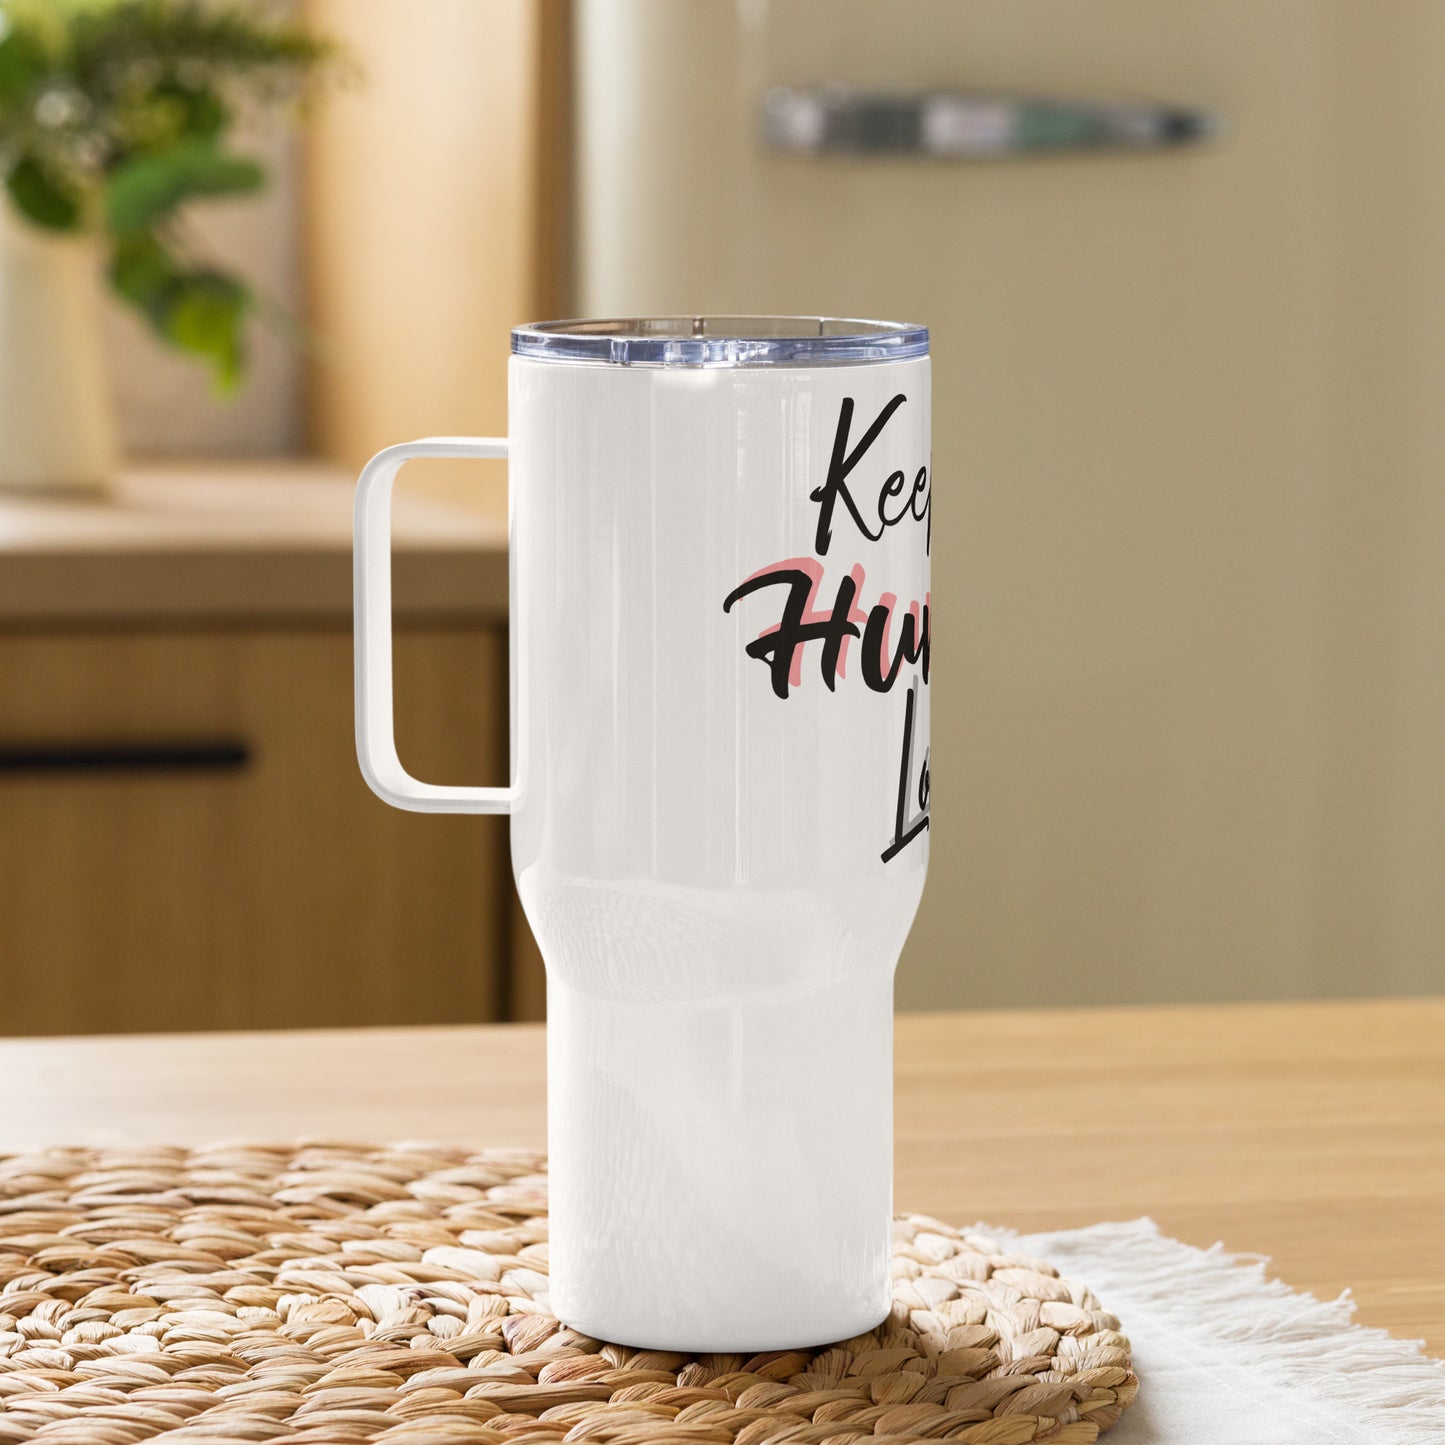 ‘Our Humble’ Travel mug with a handle